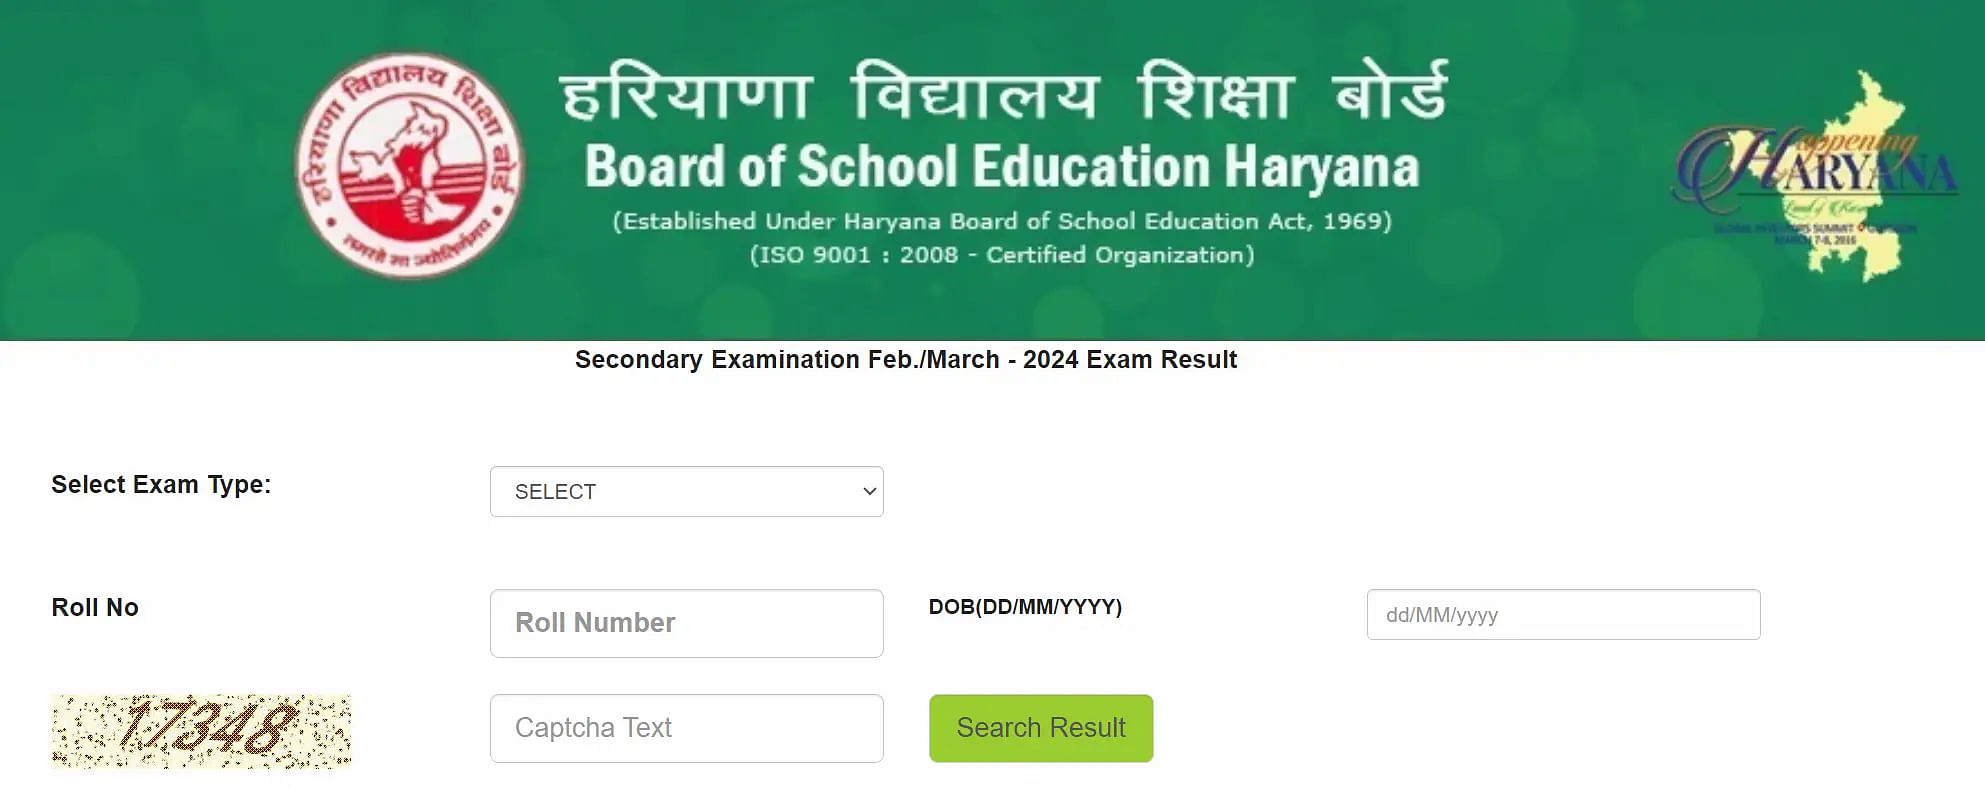 HBSE 10th result